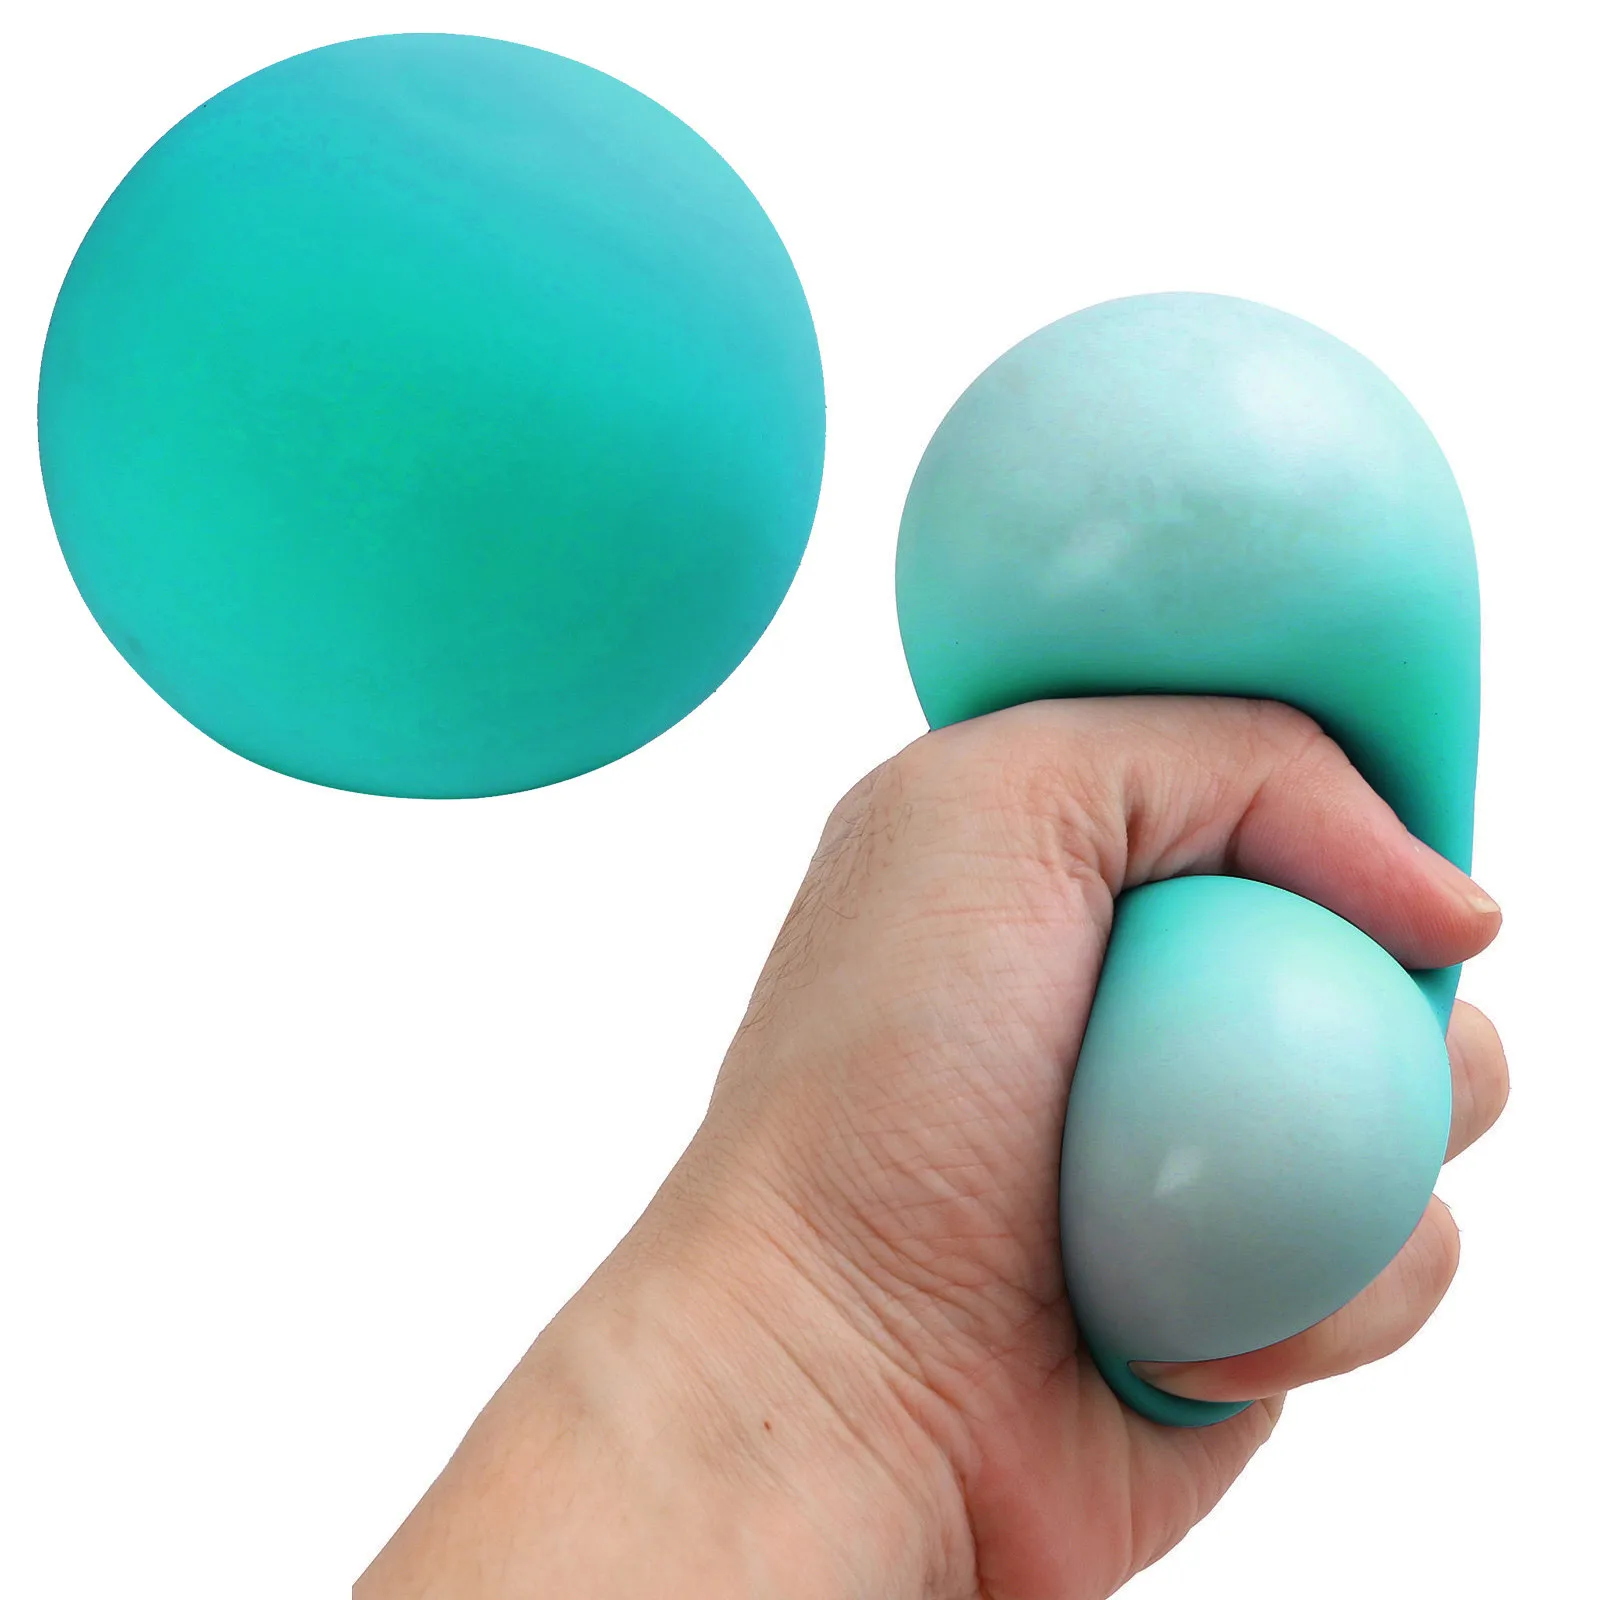 Fidget Toys Stress Relief Balls for Kids and Adults Antistress Ball Stress Relief Squeezing Balls Creative Hand Grip Pressure